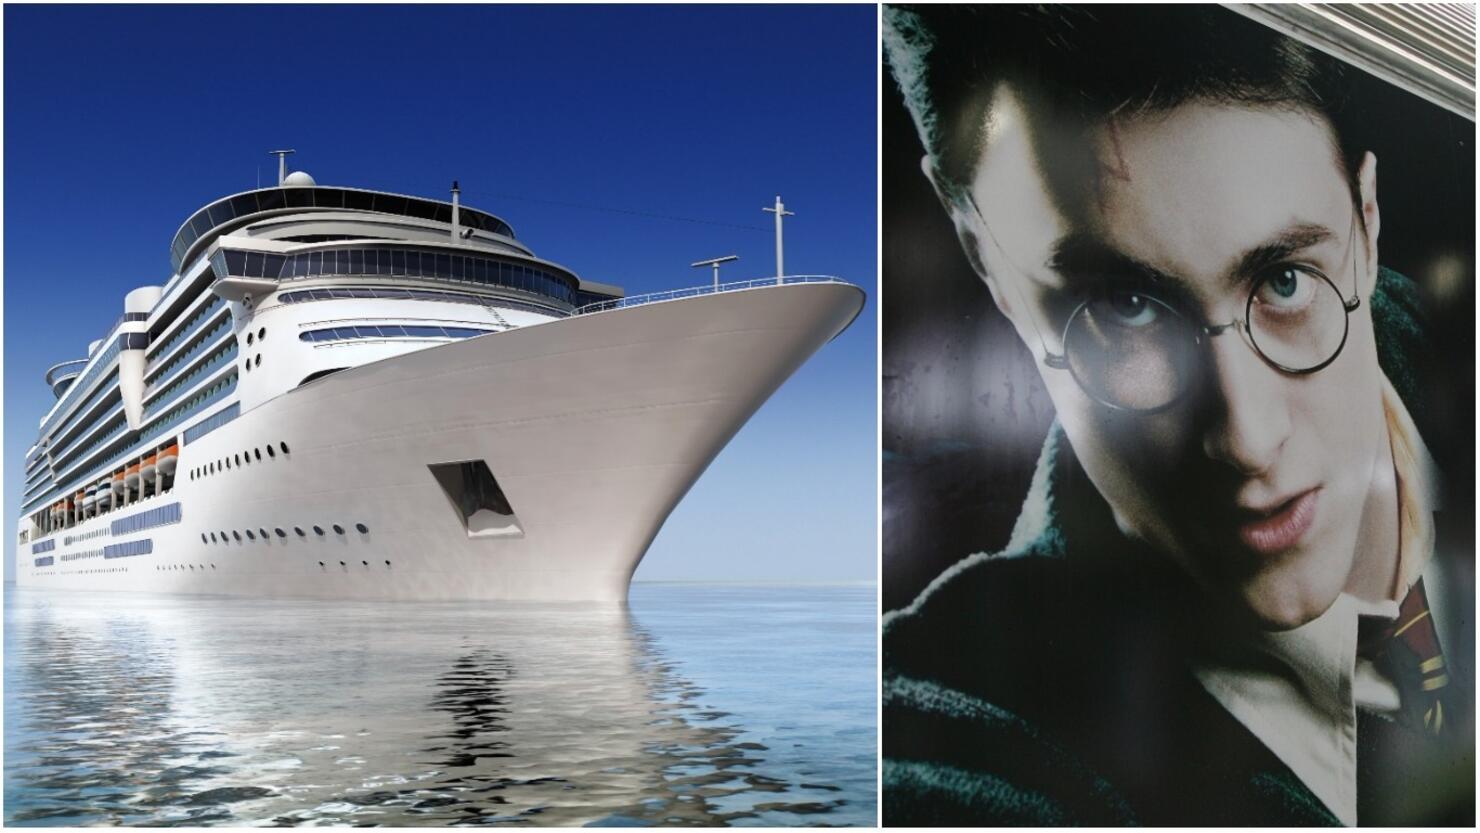 A Harry PotterThemed Cruise Sets Sail This Summer & We're So Ready For